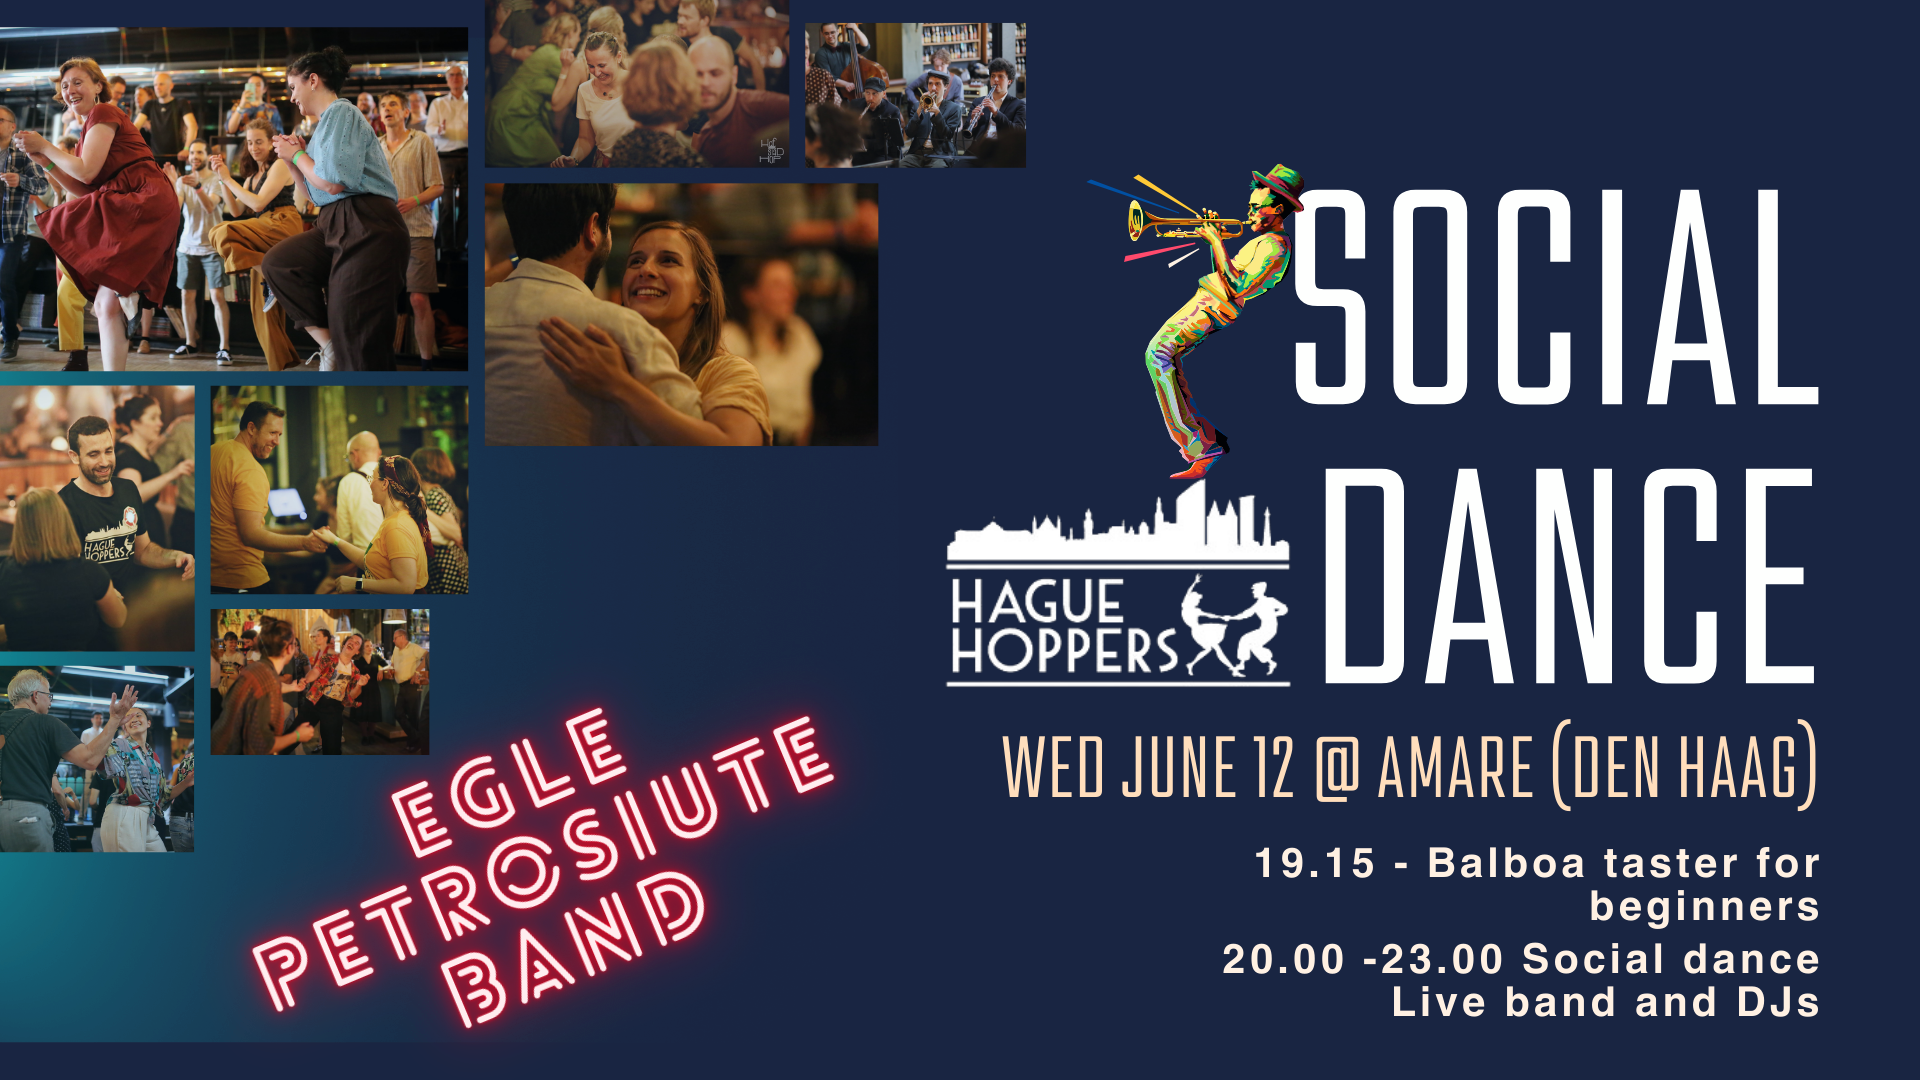 Hague Hoppers Social Dance in Amare on June 12